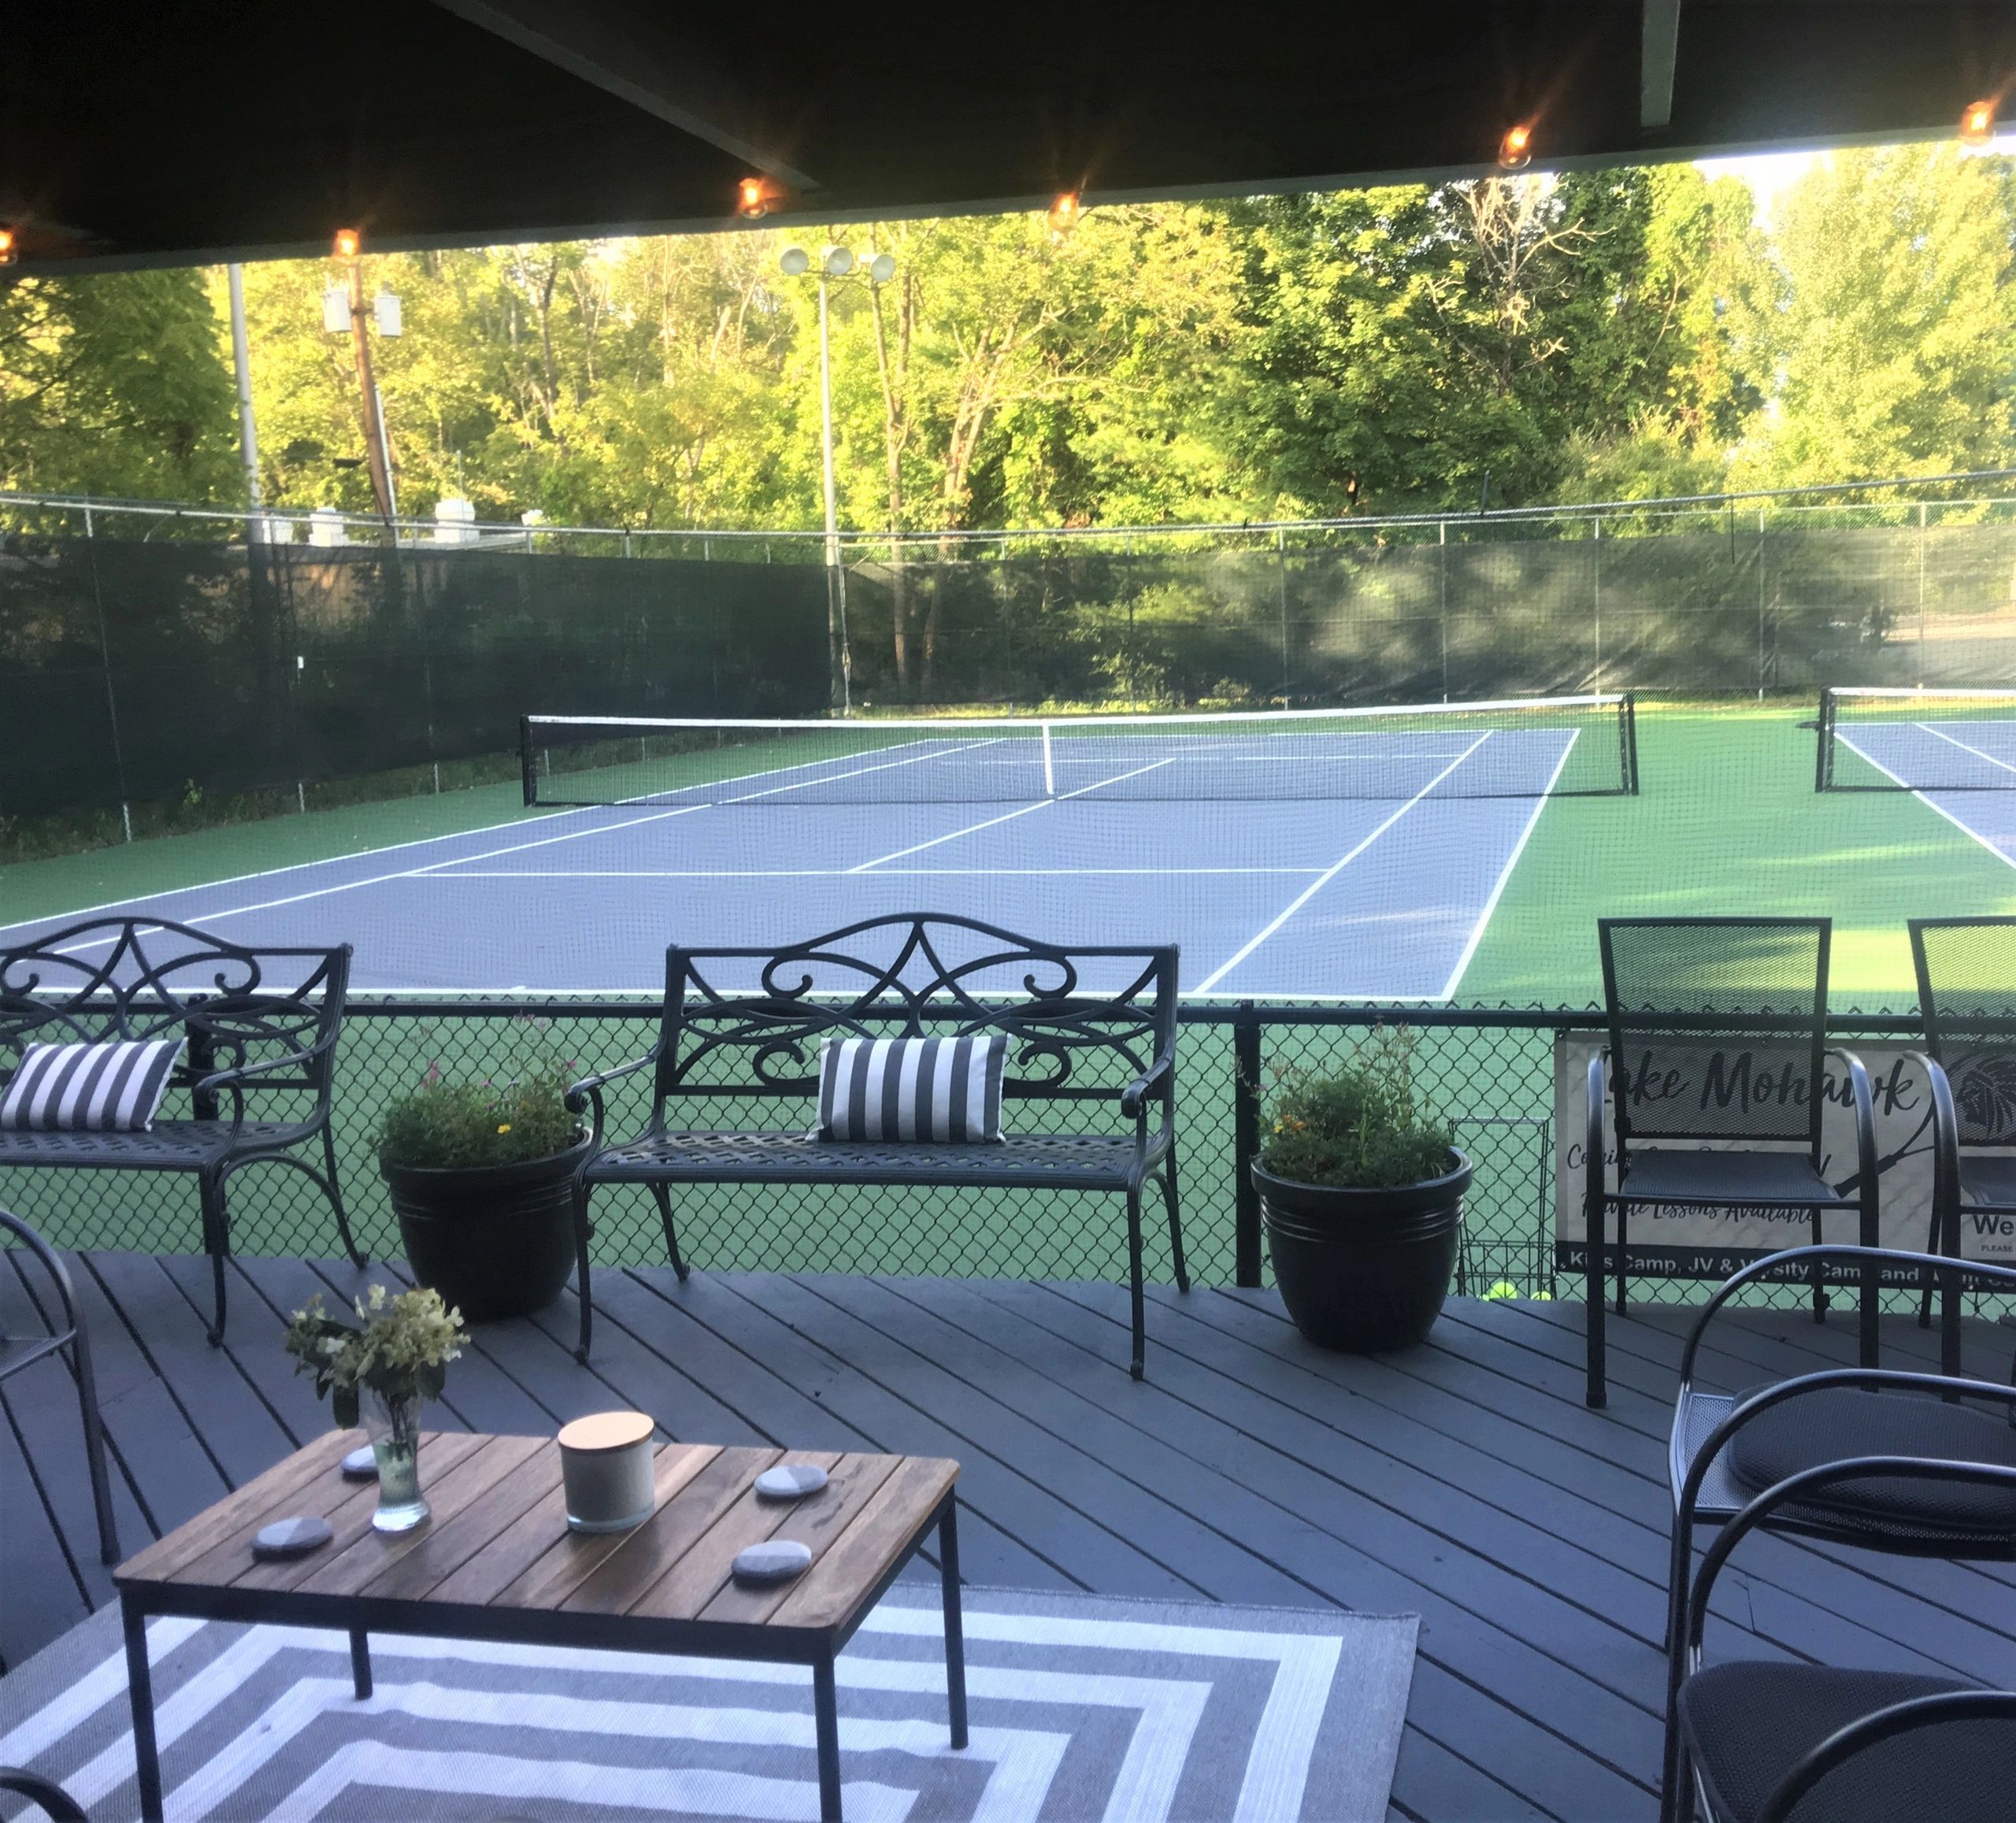 Lake Mohawk Tennis Club's newly resurfaced courts and renovated viewing deck